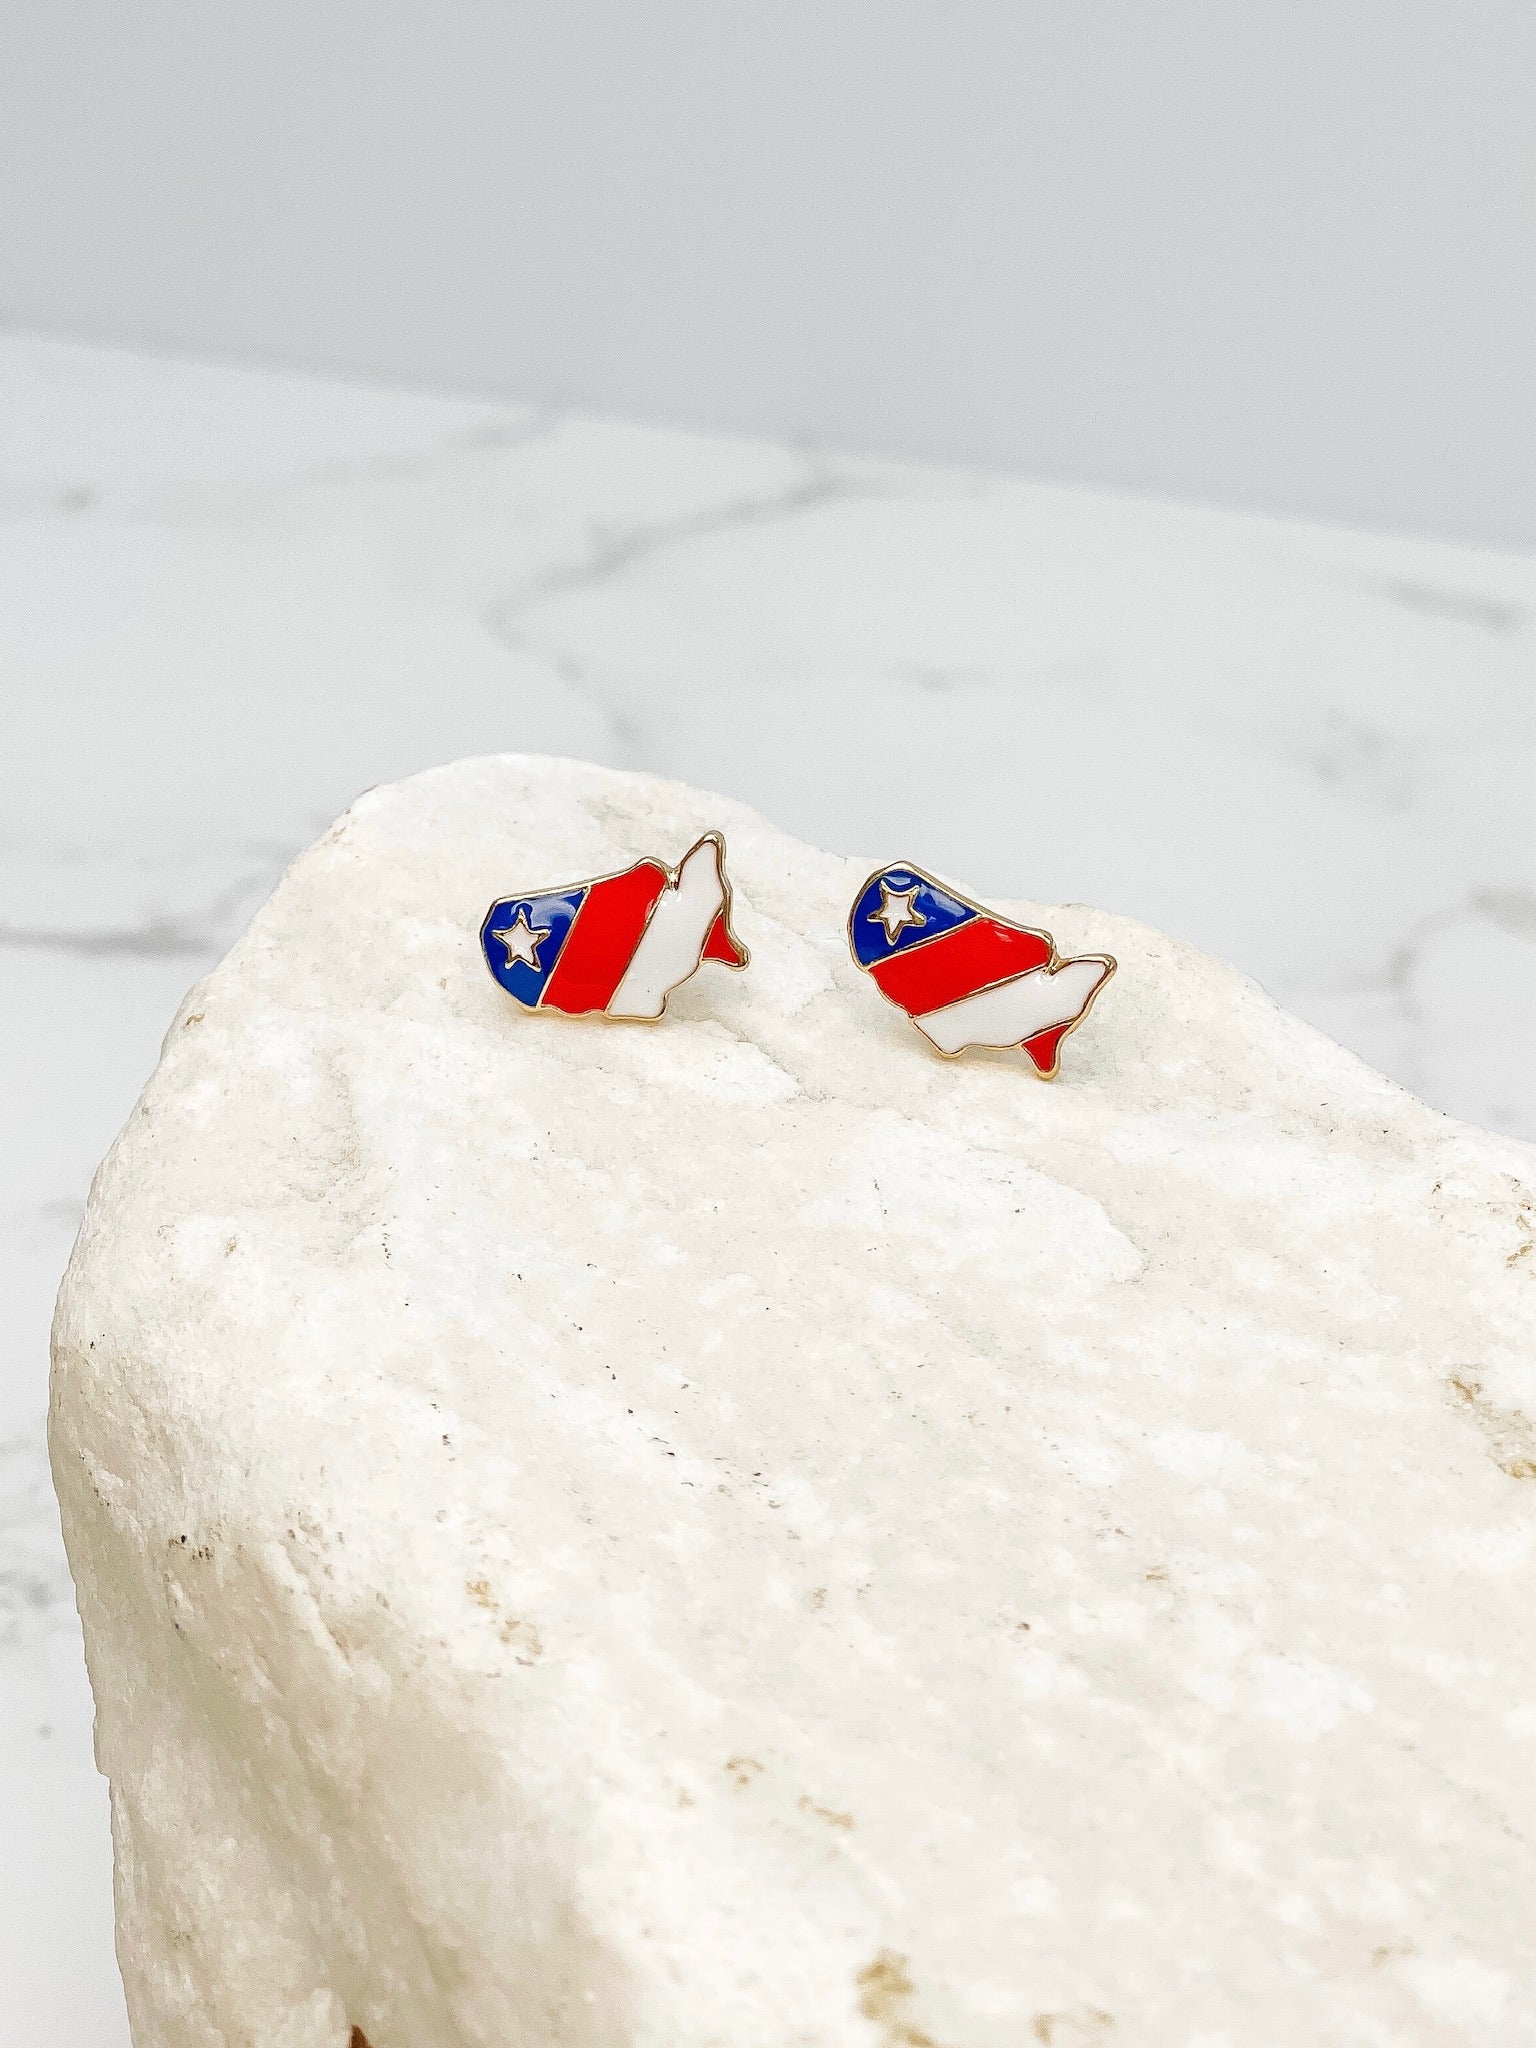 USA Signature Enamel Studs by Prep Obsessed